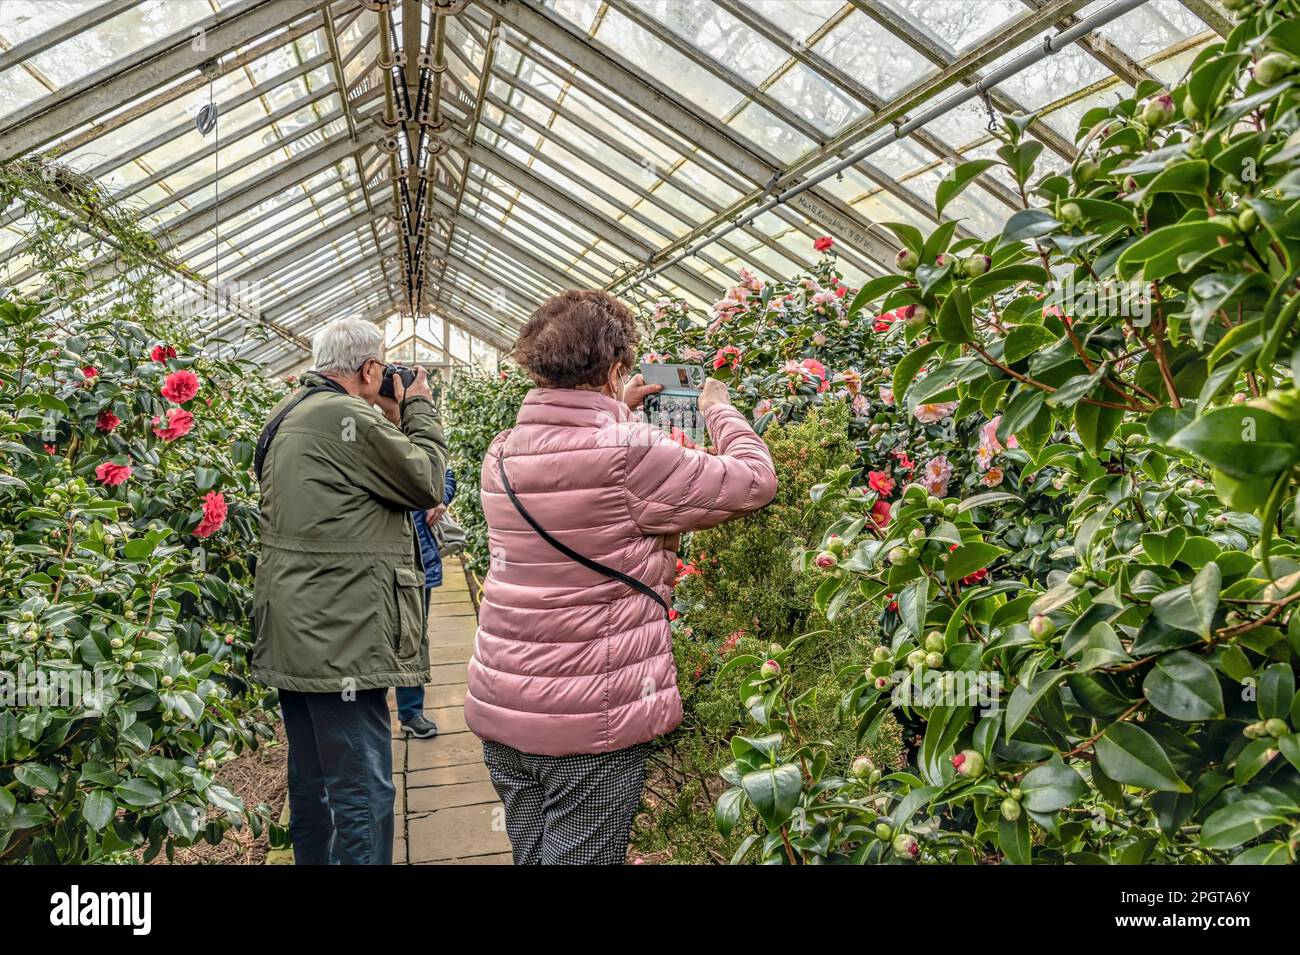 Tourists taking photos at the camellia show in one of the greenhouses of Pirna Zuschendorf country palace in Saxony, Germany Stock Photo